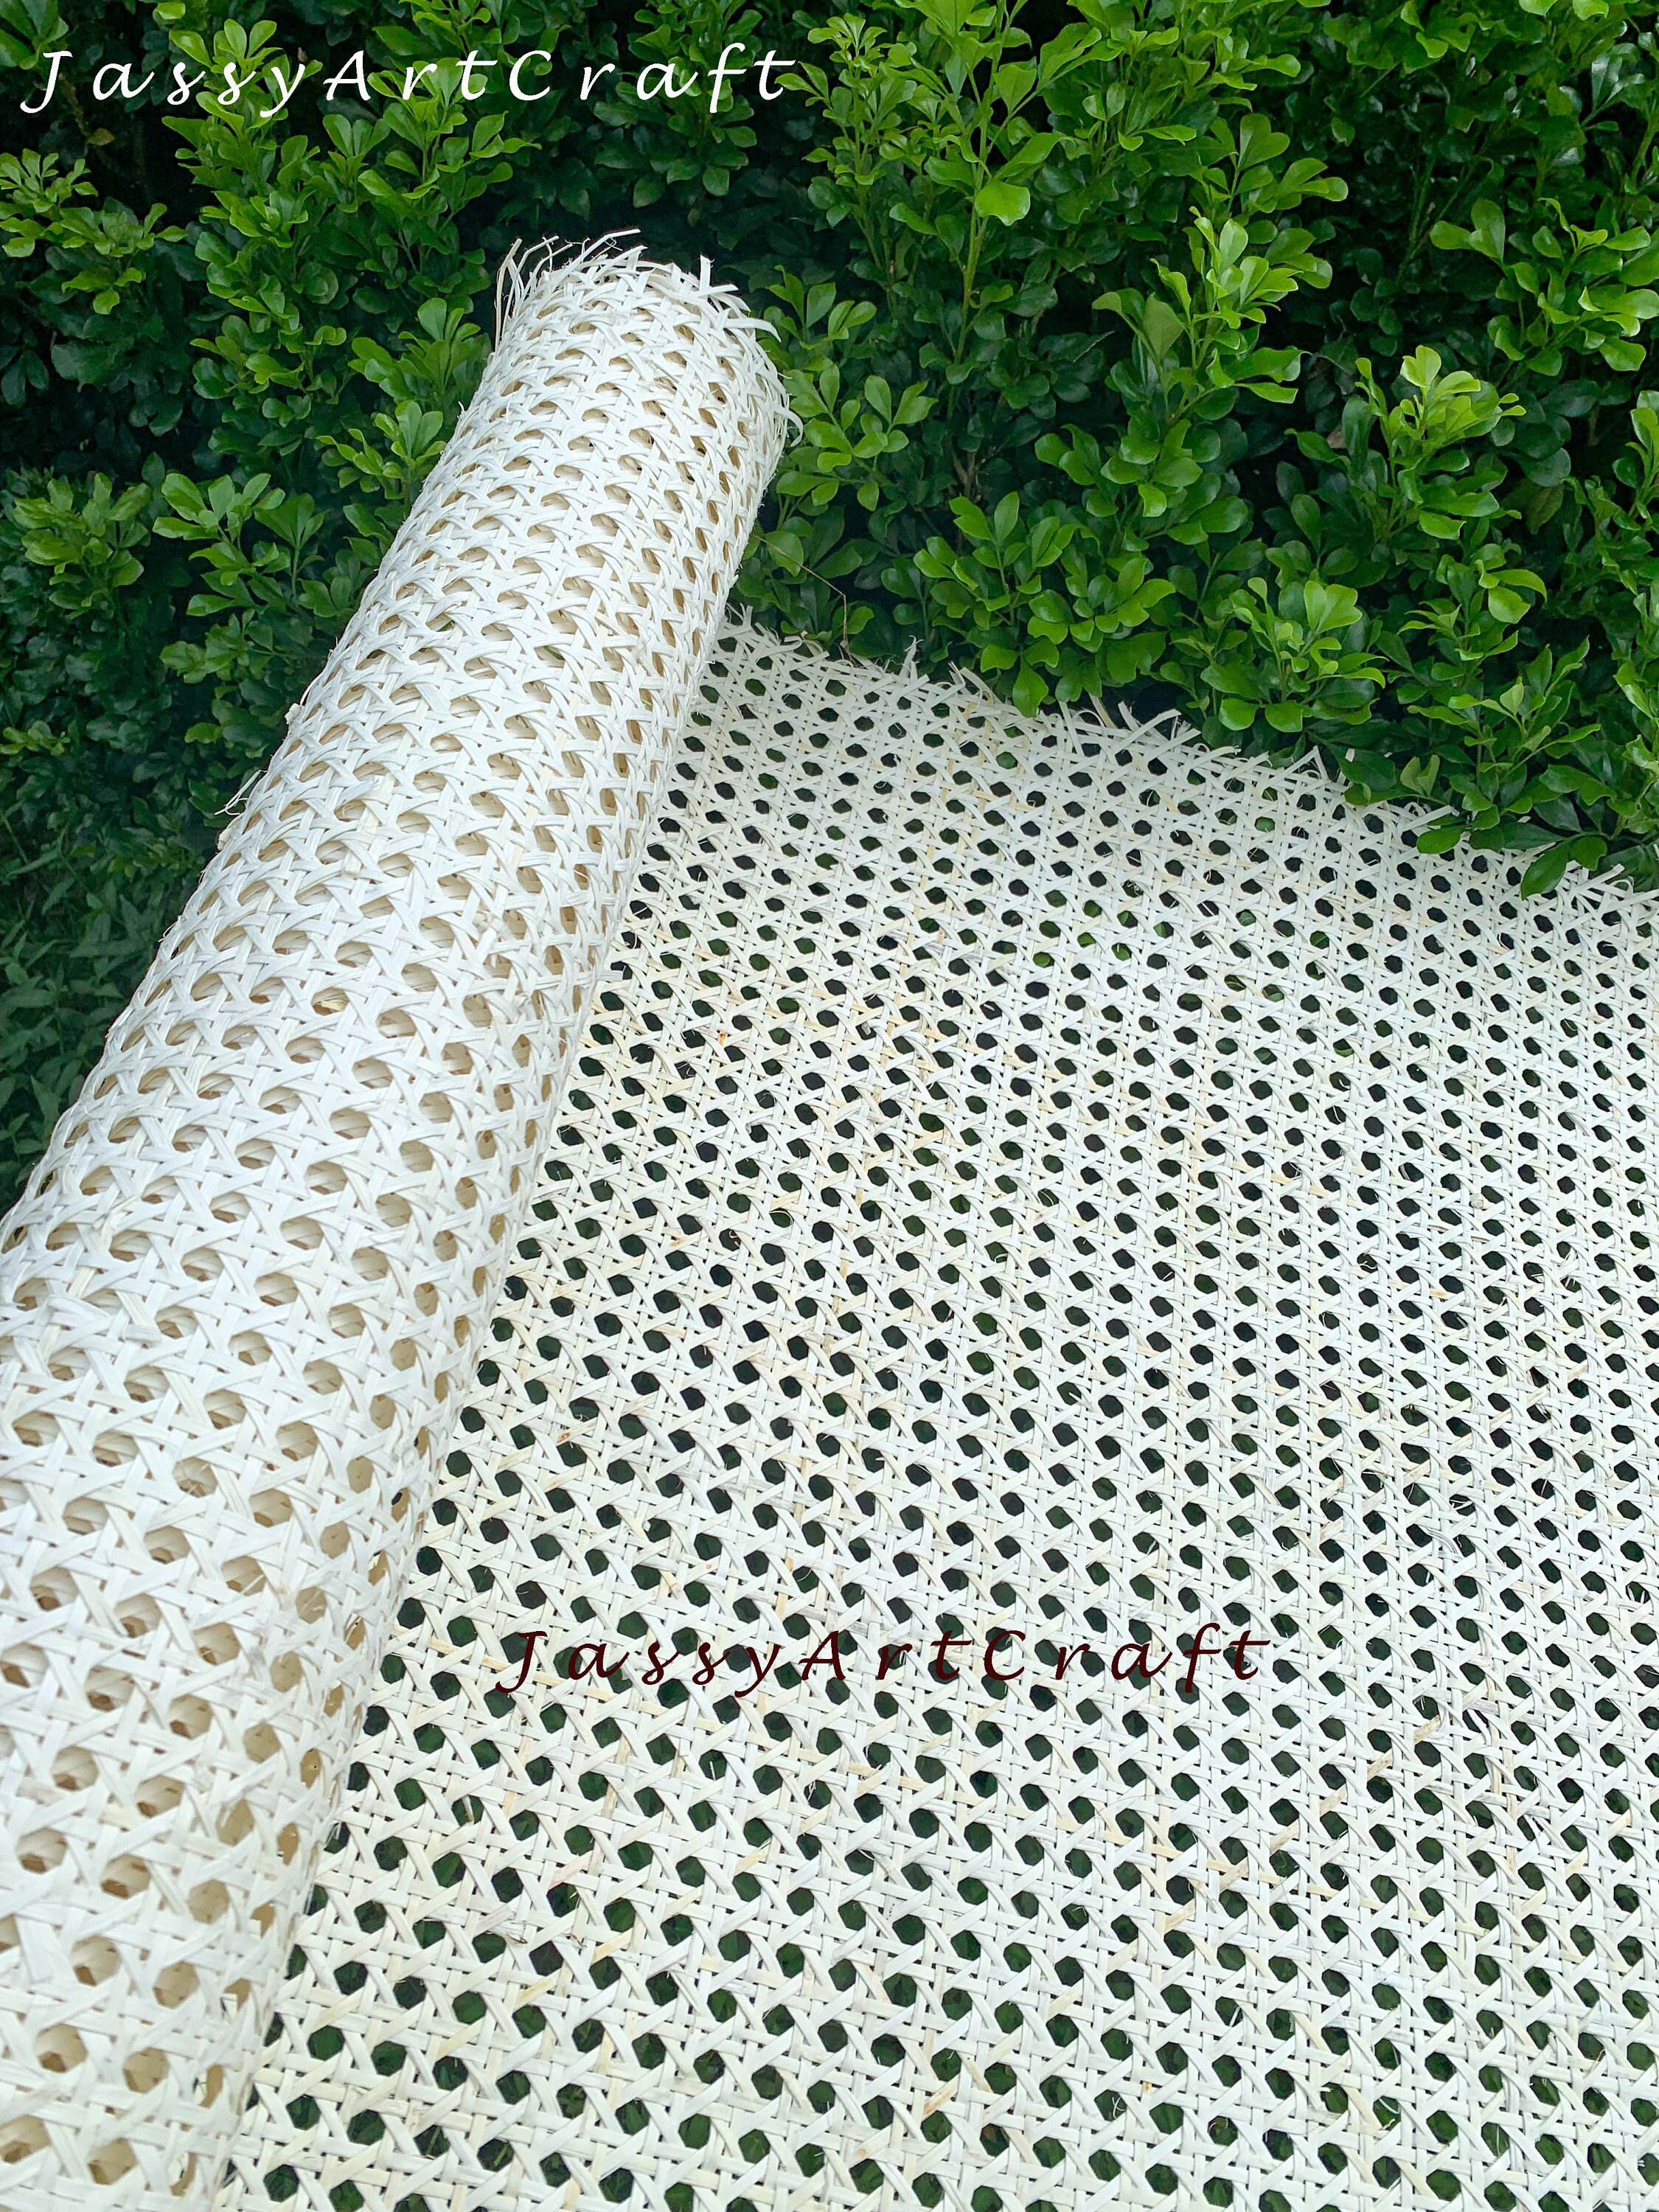 Discount Trends 24” Wide Natural Rattan Webbing Roll for Caning Projects - Woven Open Mesh for Caning Chair - Rattan Hexagon Cane Webbing - 24 x 36